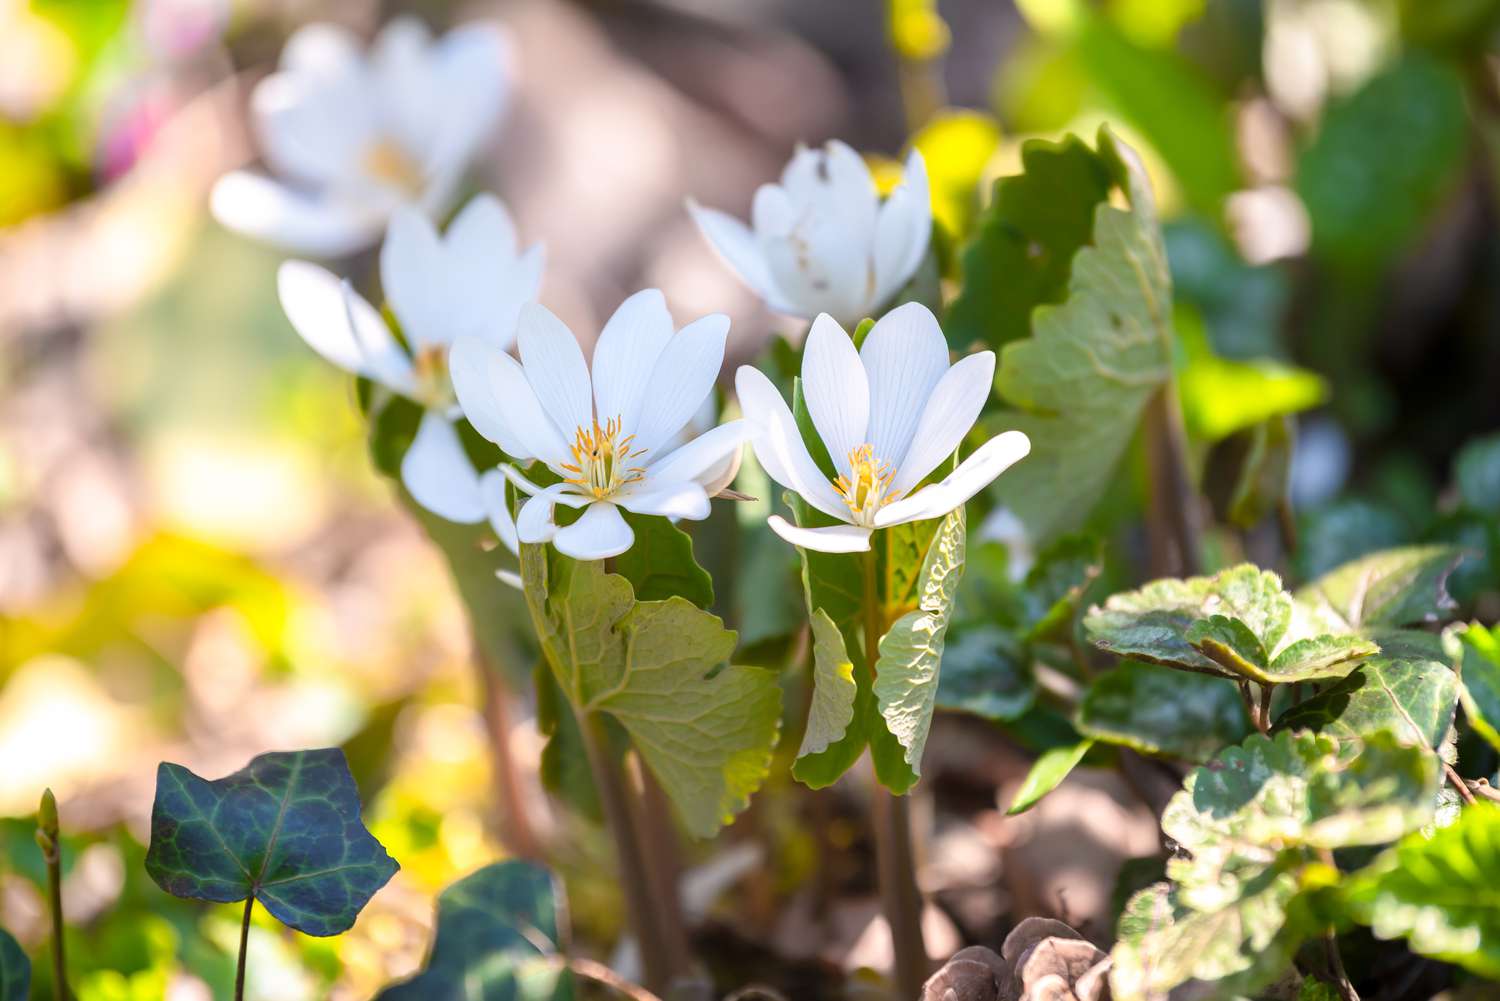 Bloodroot plant with small white flowers on short stems in shade garden